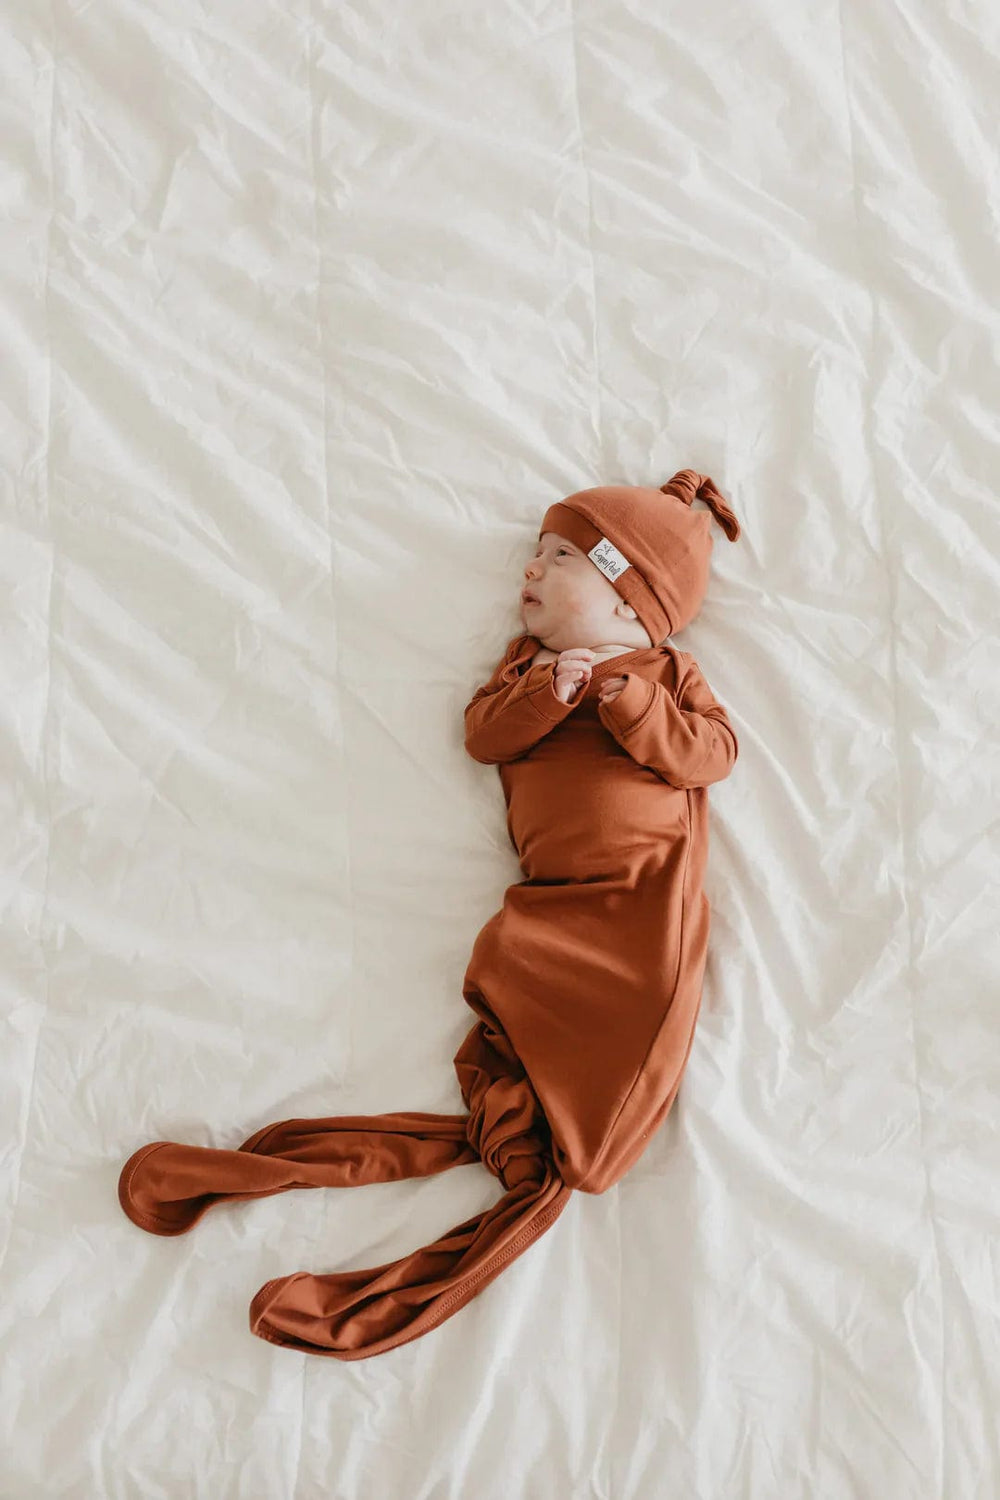 Copper Pearl Sleeping Moab Newborn Knotted Gown